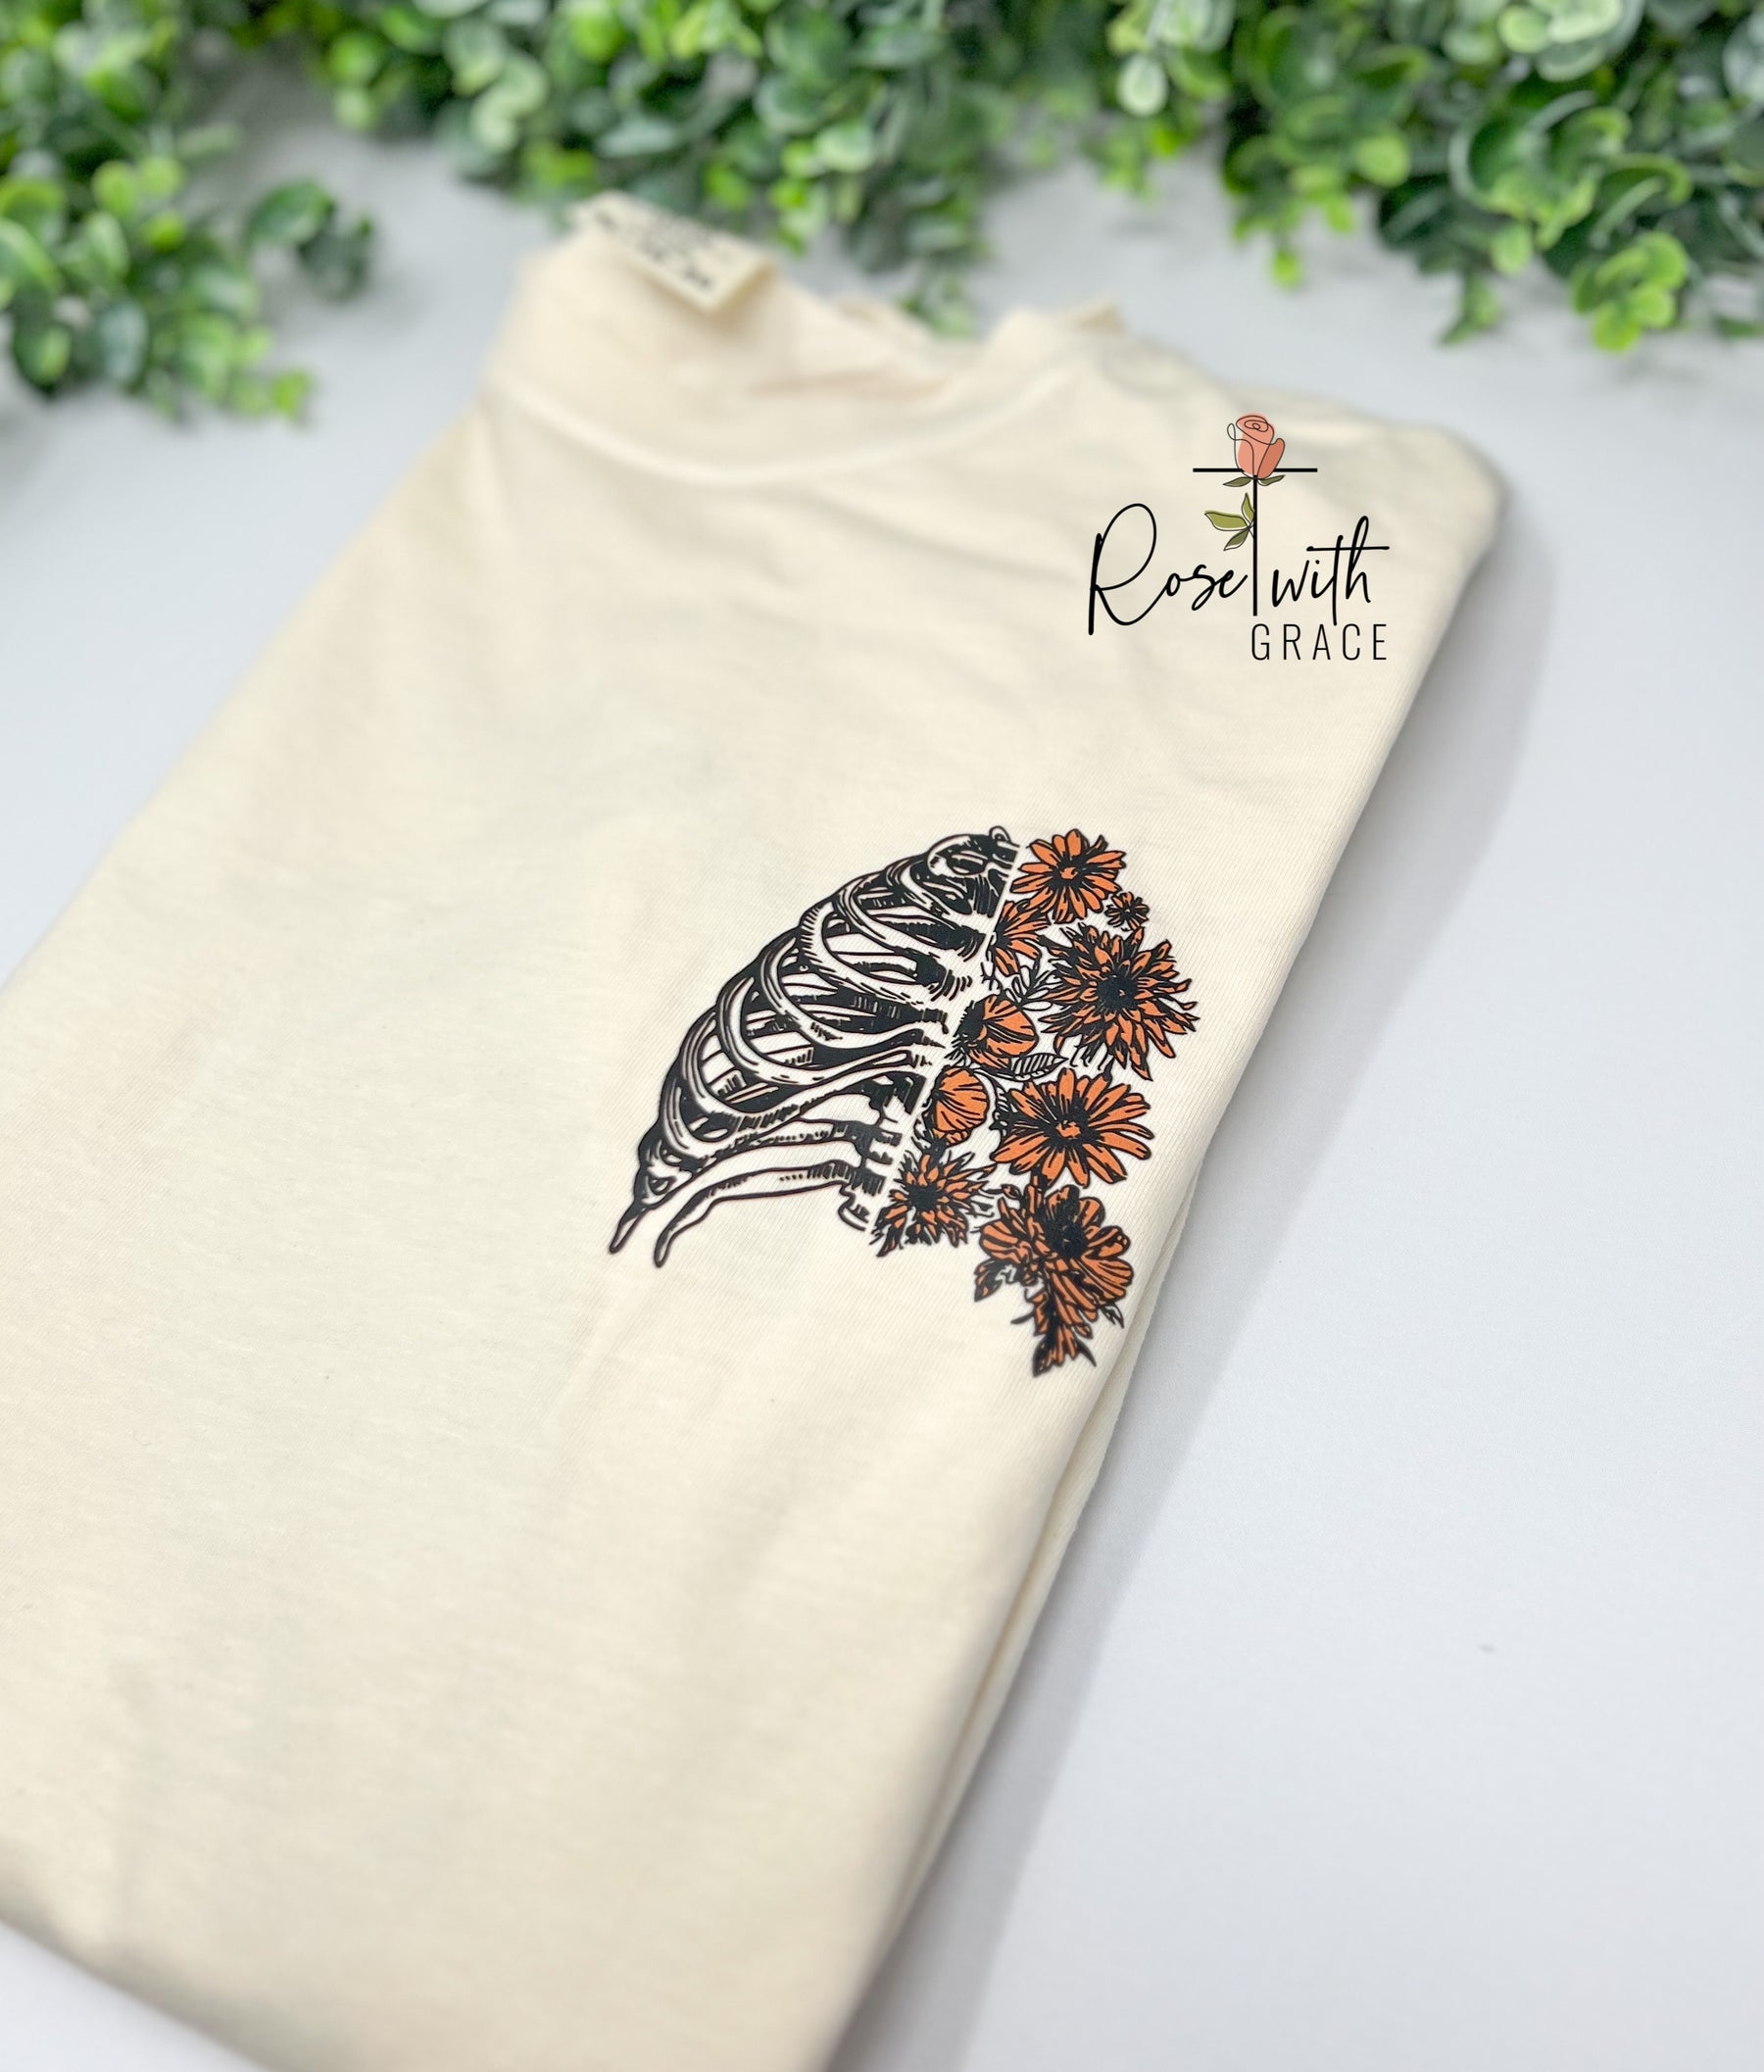 Grows Flowers in the Darkest Parts - Comfort Colors T-Shirt (Pocket & Back Design) Rose with Grace LLC